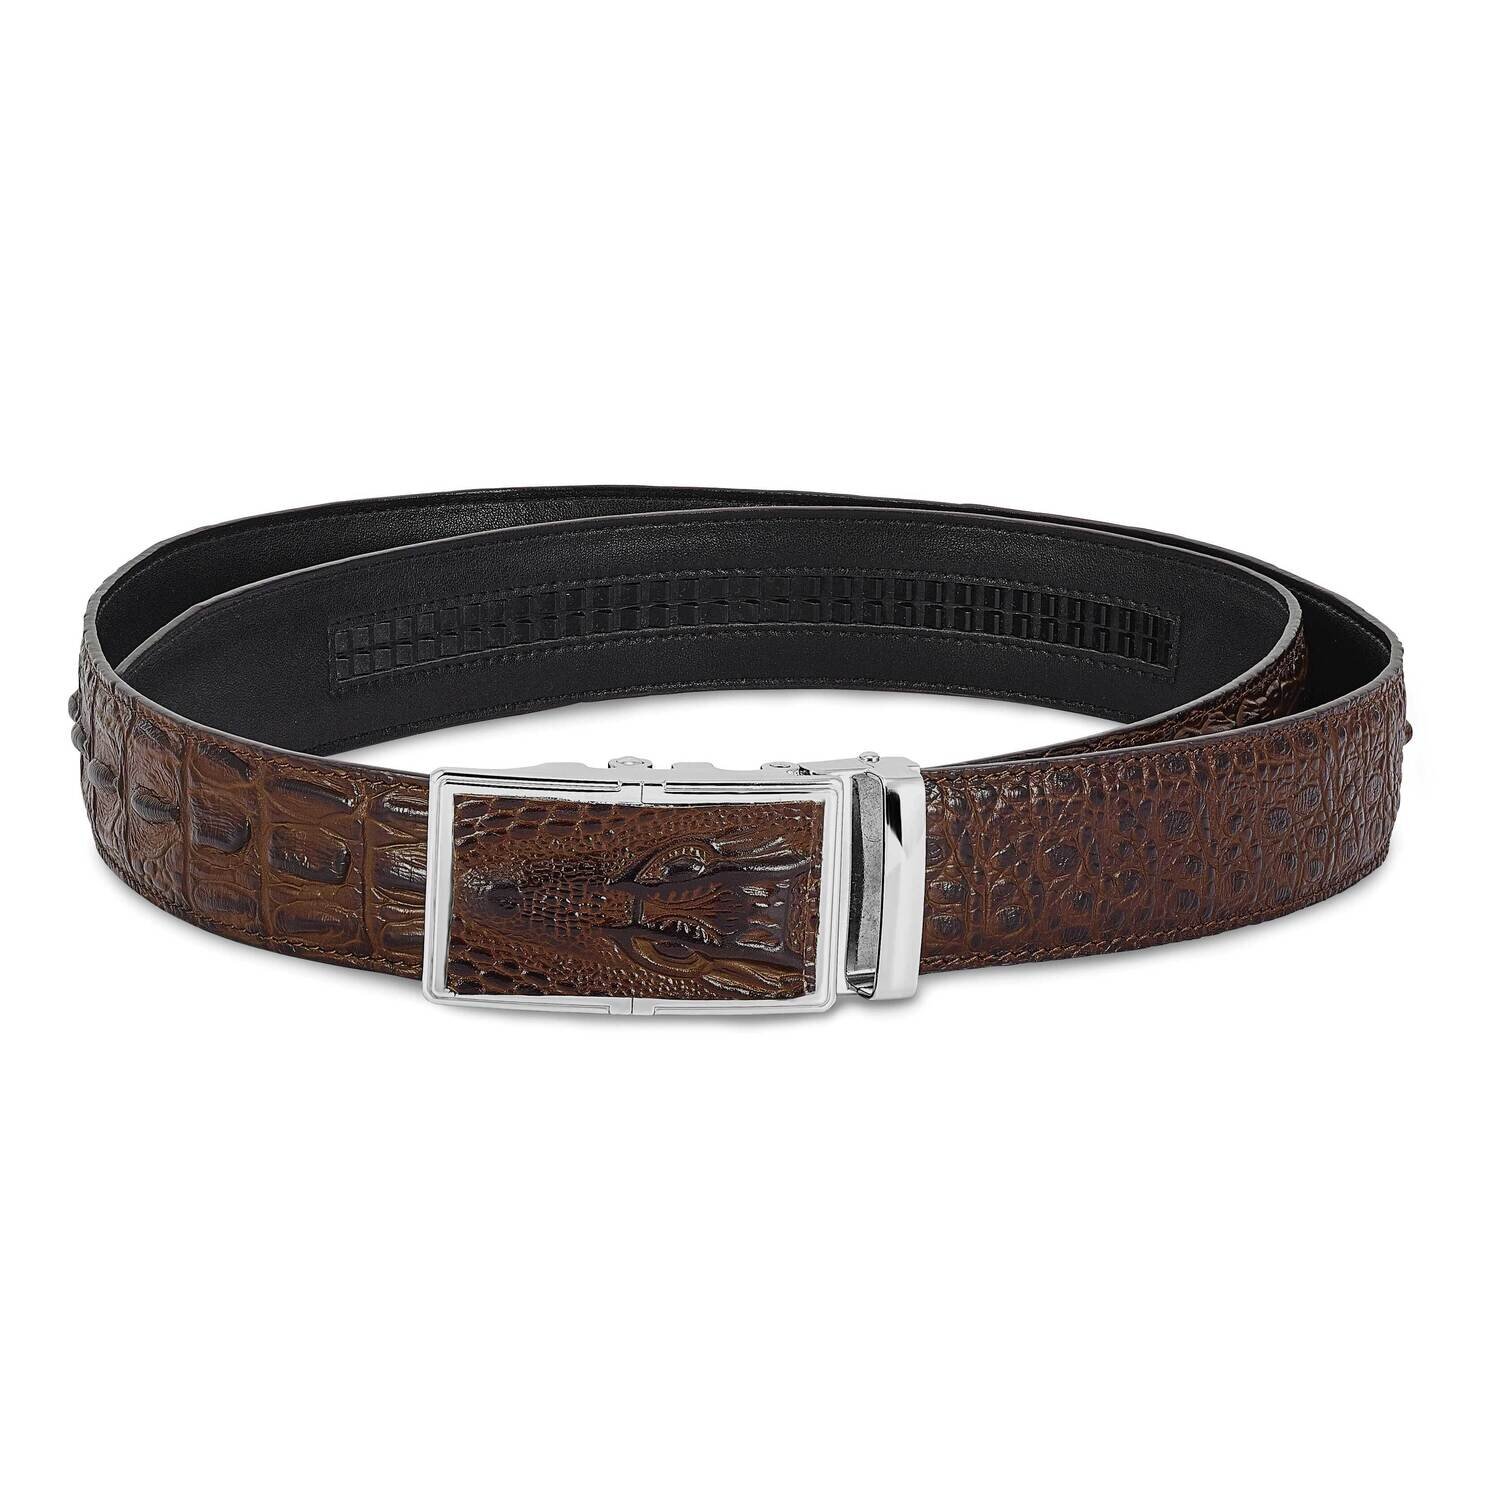 By Jere Luxury Leathers Top Grain Leather Croc Texture Large (44-46) Adjustable Brown Belt JLL112-BRL